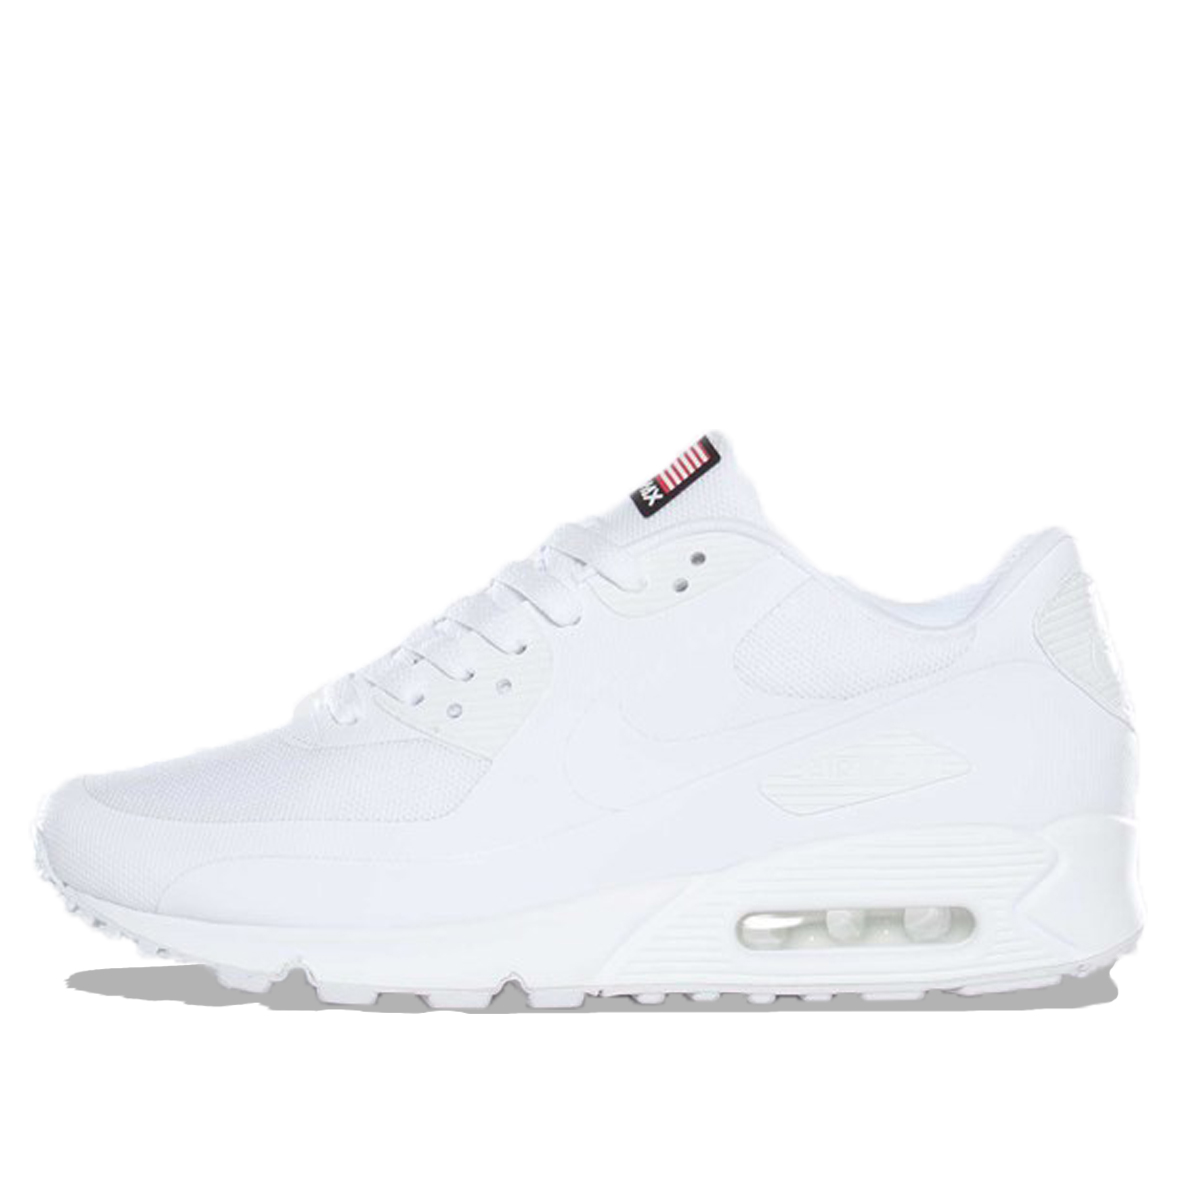 Alcanzar proteger sarcoma Nike Air Max 90 Hyperfuse Independence Day White | 613841-110 - KLEKT